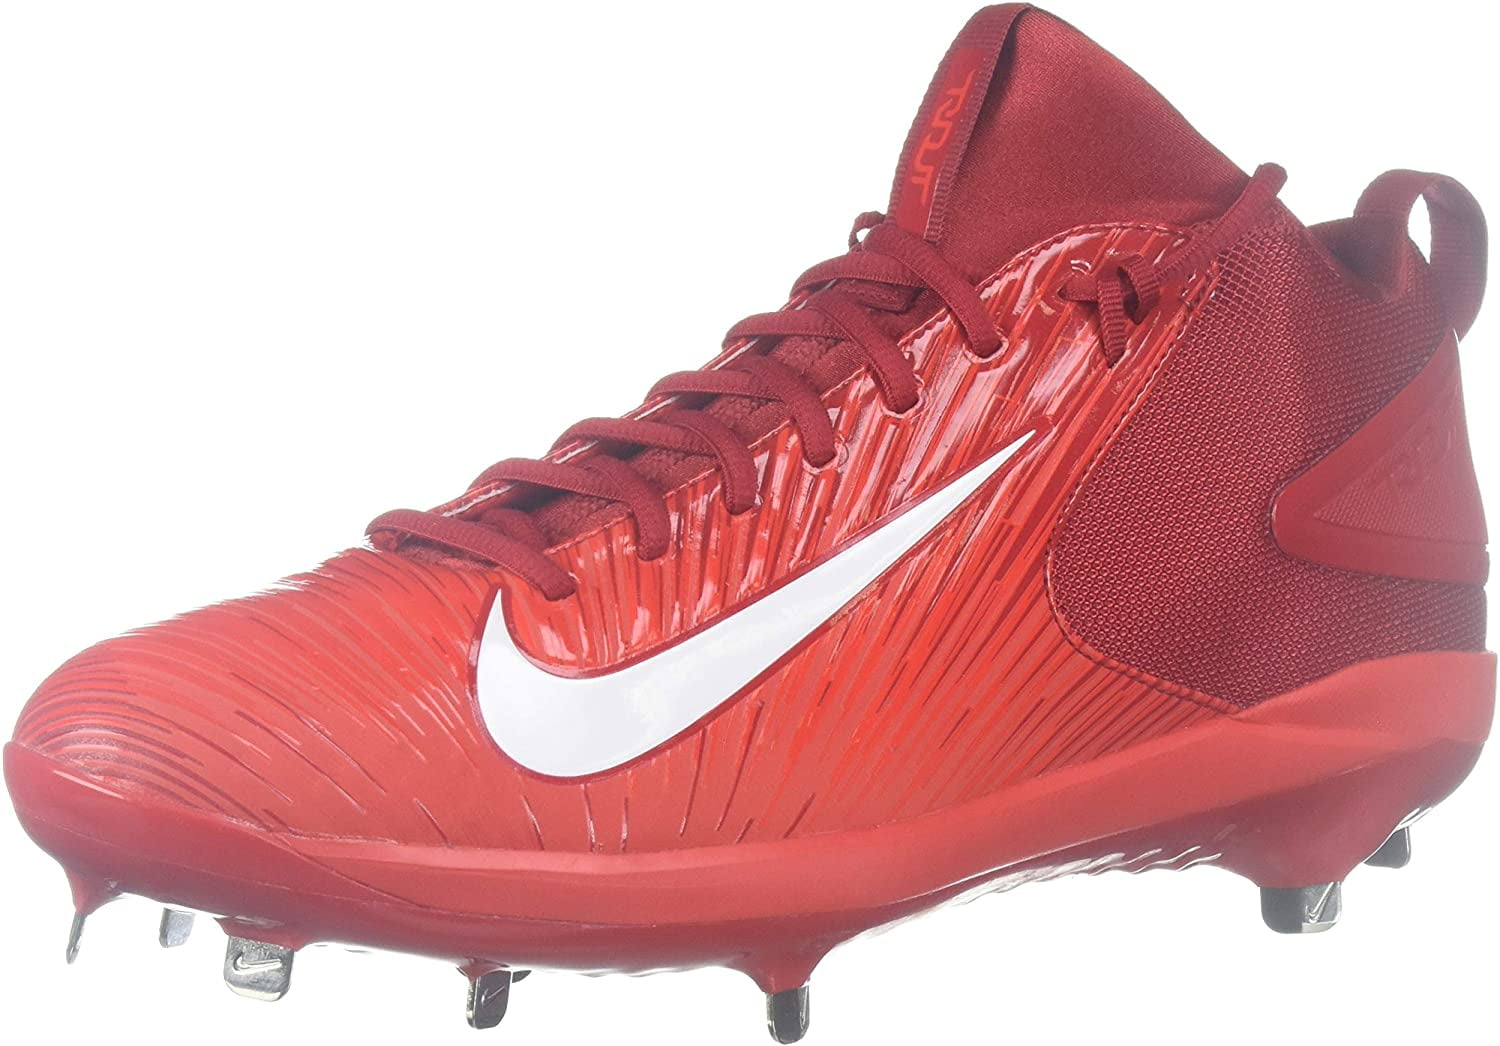 mike trout 3 cleats